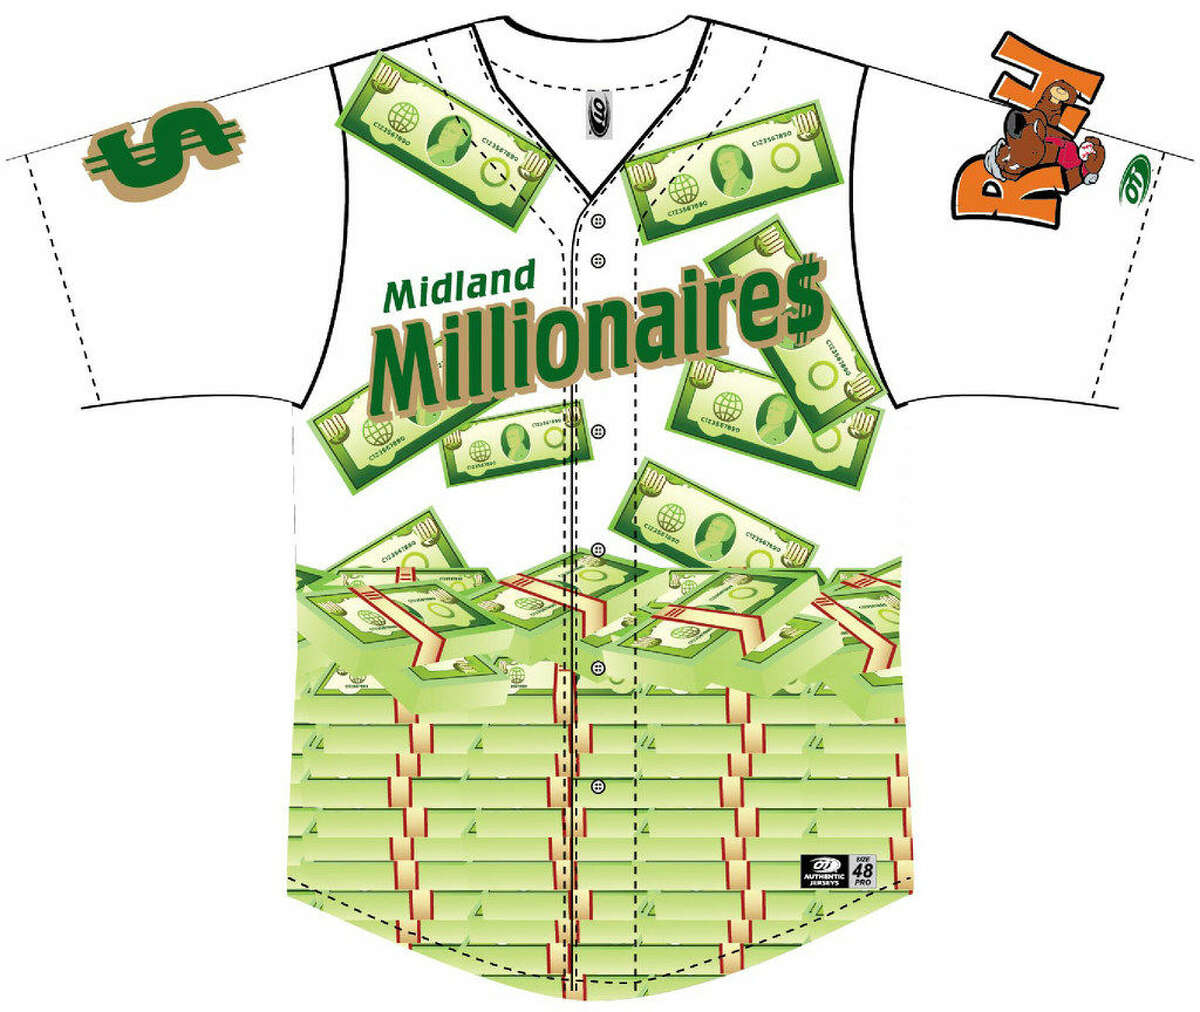 A diagram of the jersey the RockHounds will wear when they will play as the Midland Millionaires between Aug. 18-20 at Security Bank Ballpark.